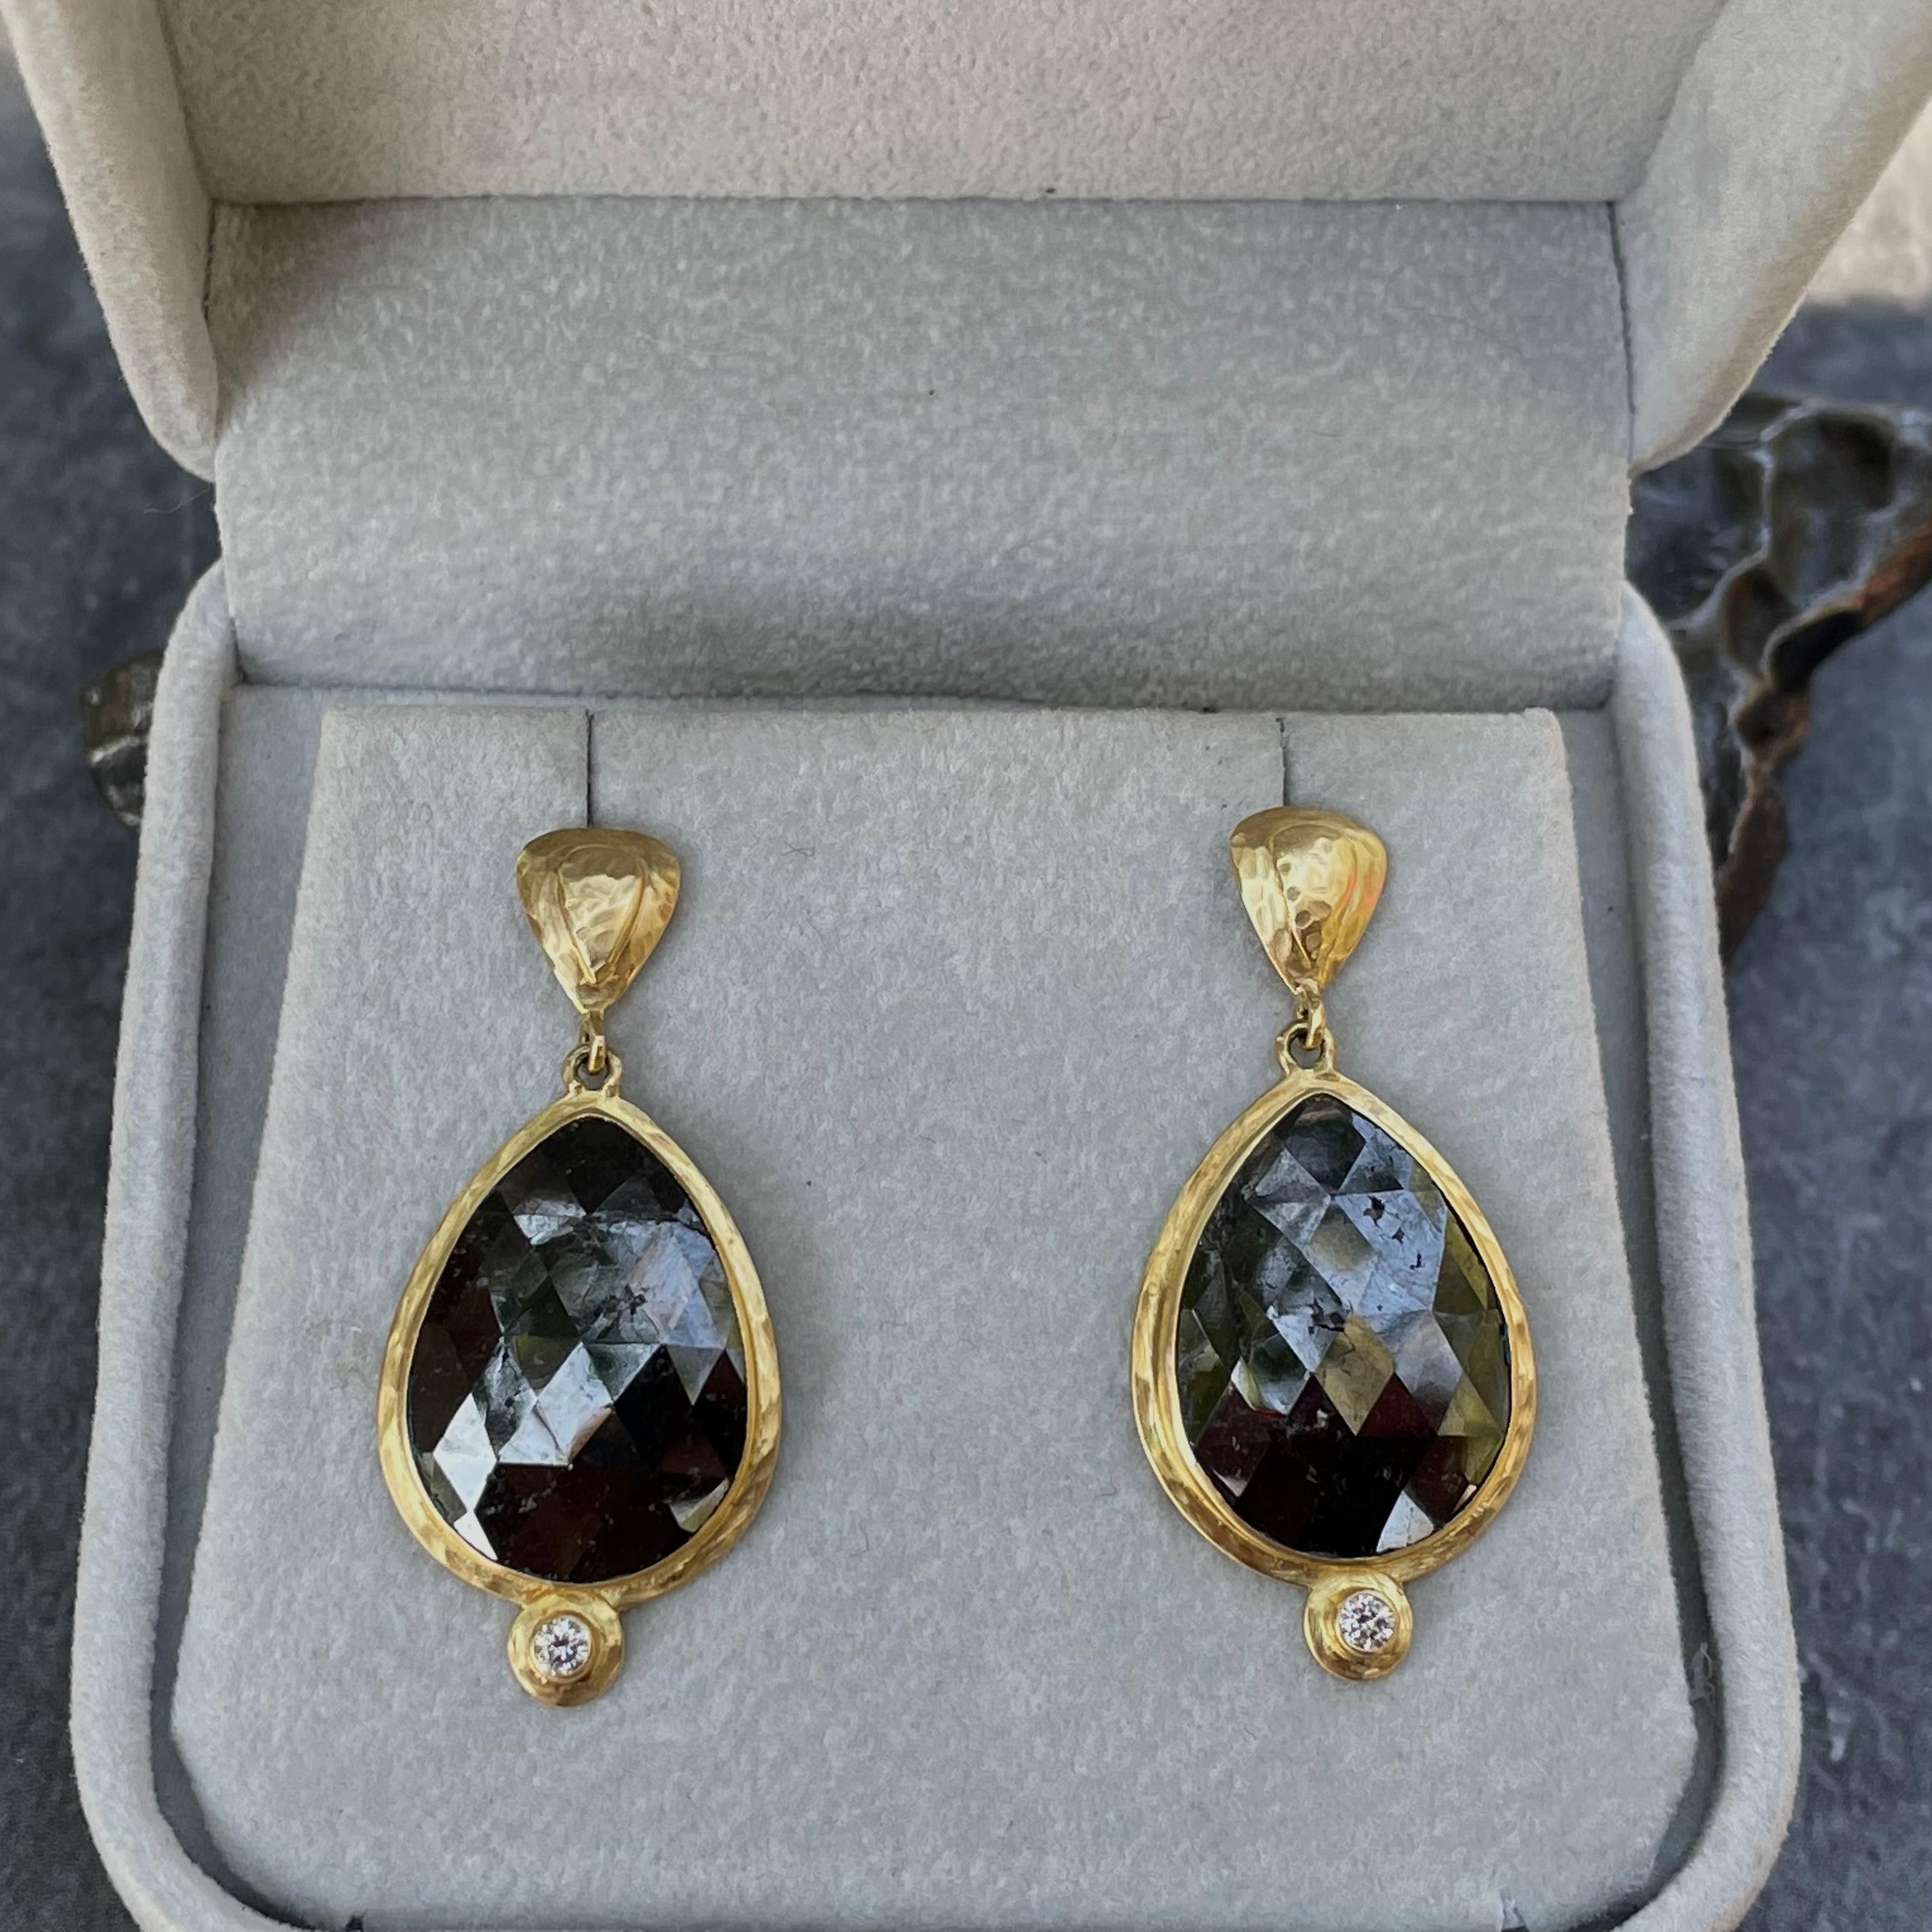 A matched pair of large 14 x 19 mm pear shaped rose cut black diamonds dangle below stepped and hammered posts with 1.8 mm VS1 white diamonds as bottom accents. Organic hammered bezels surround.  Elegant and a statement.